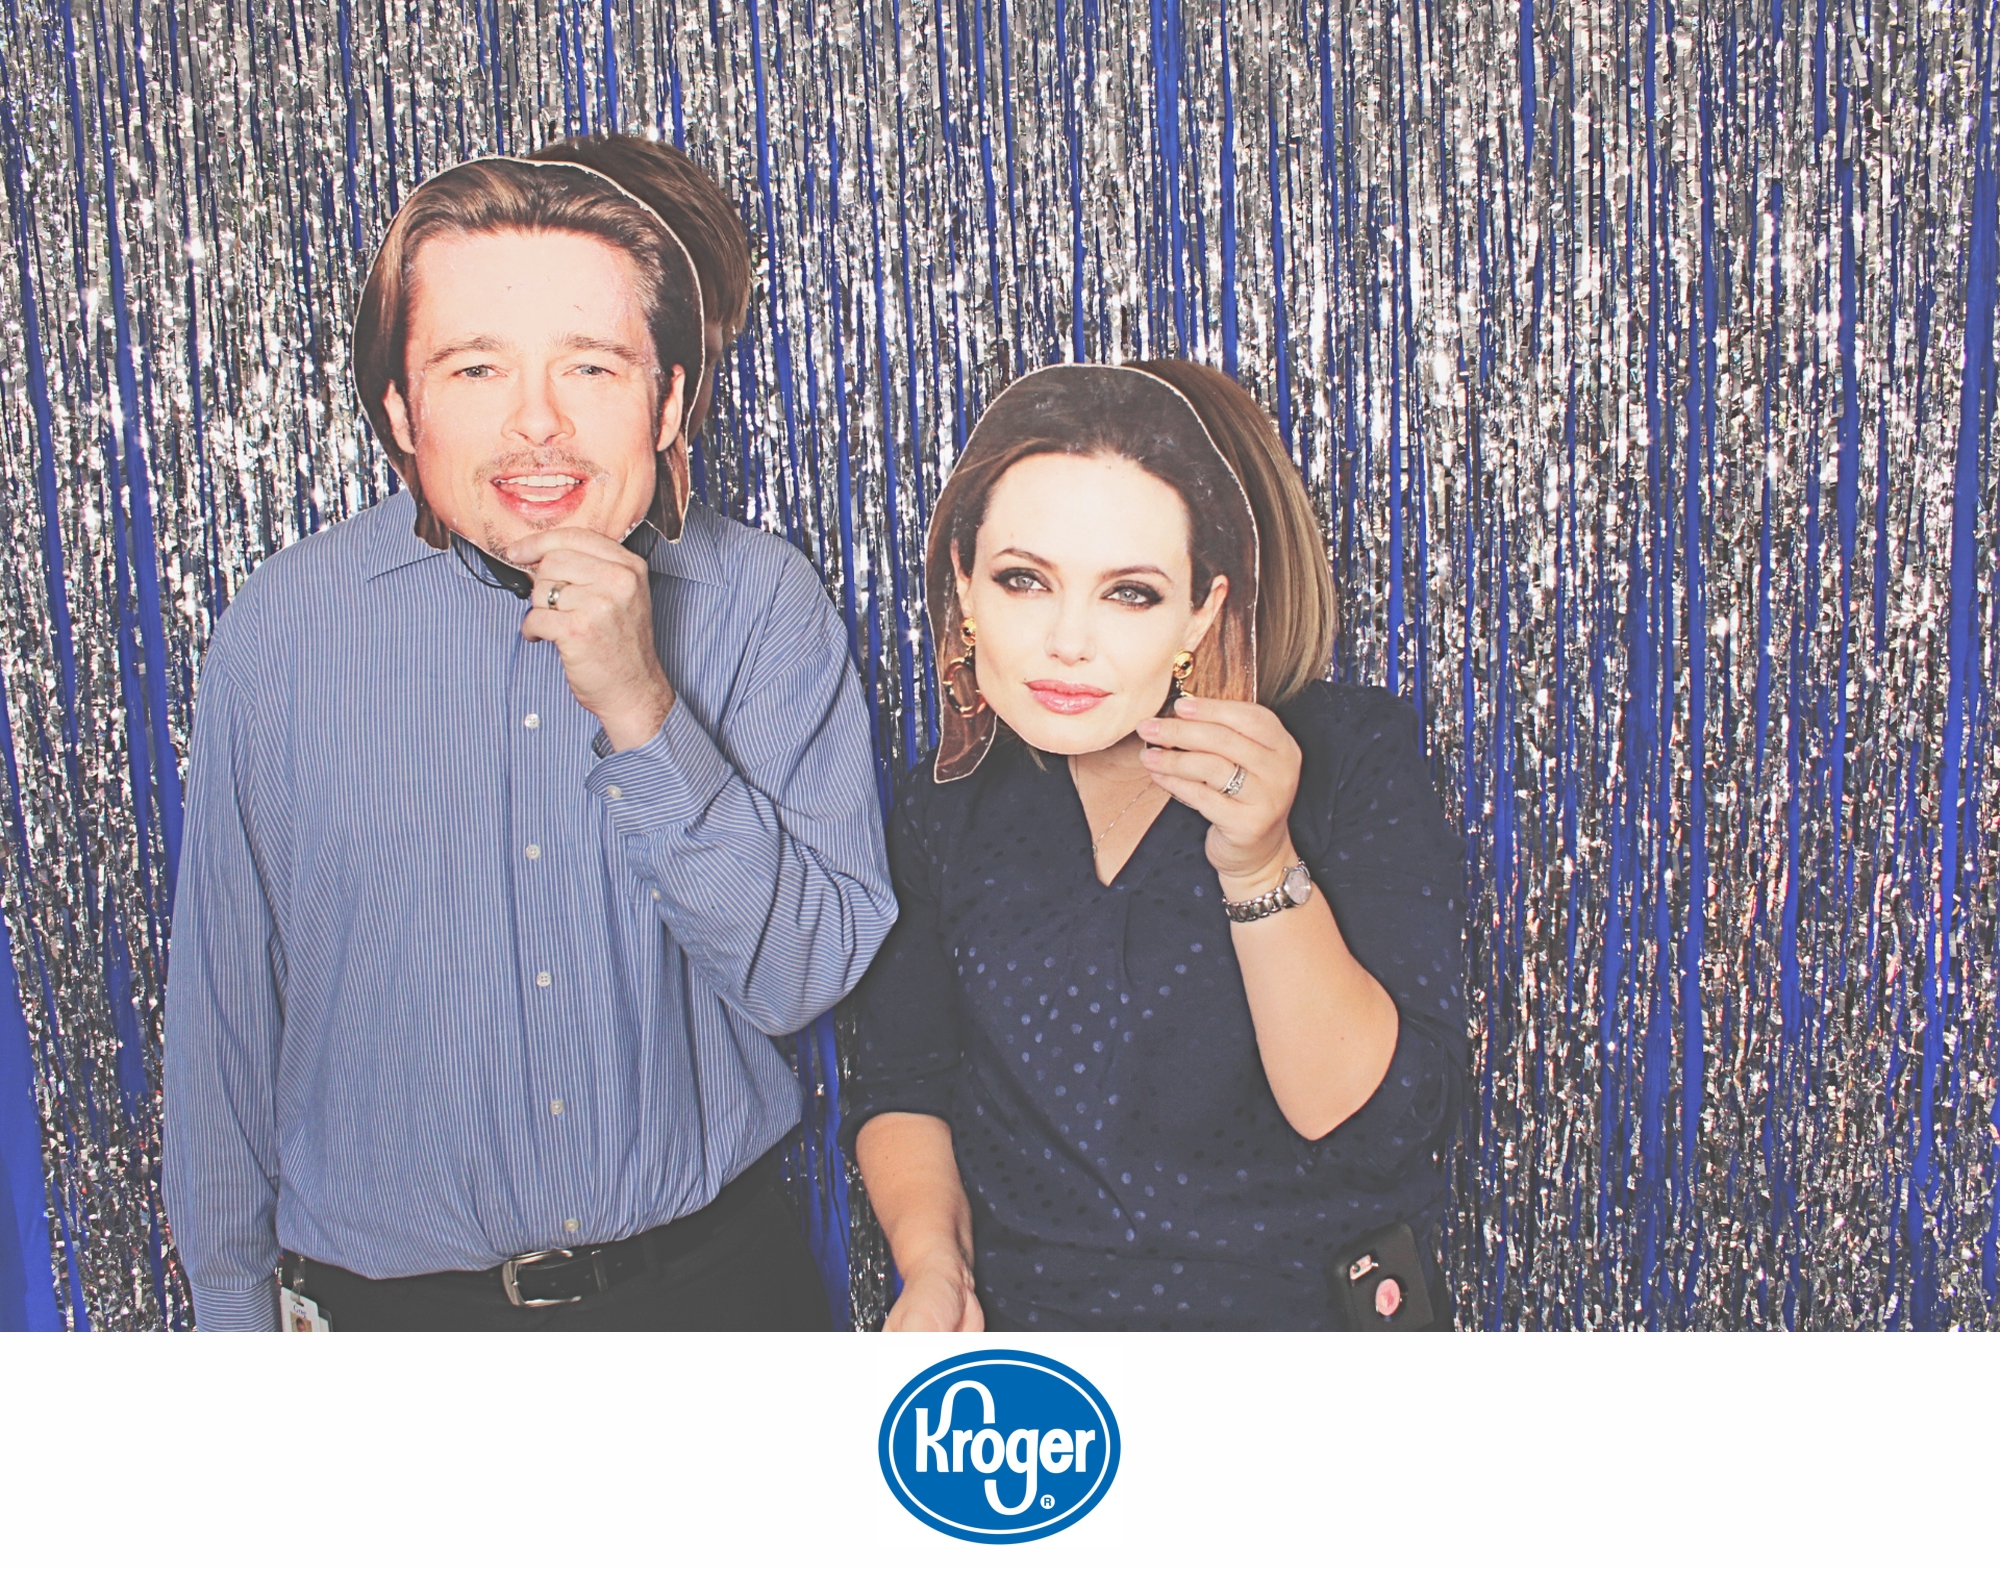 kroger-corporate-photo-booth-robot-booth-2